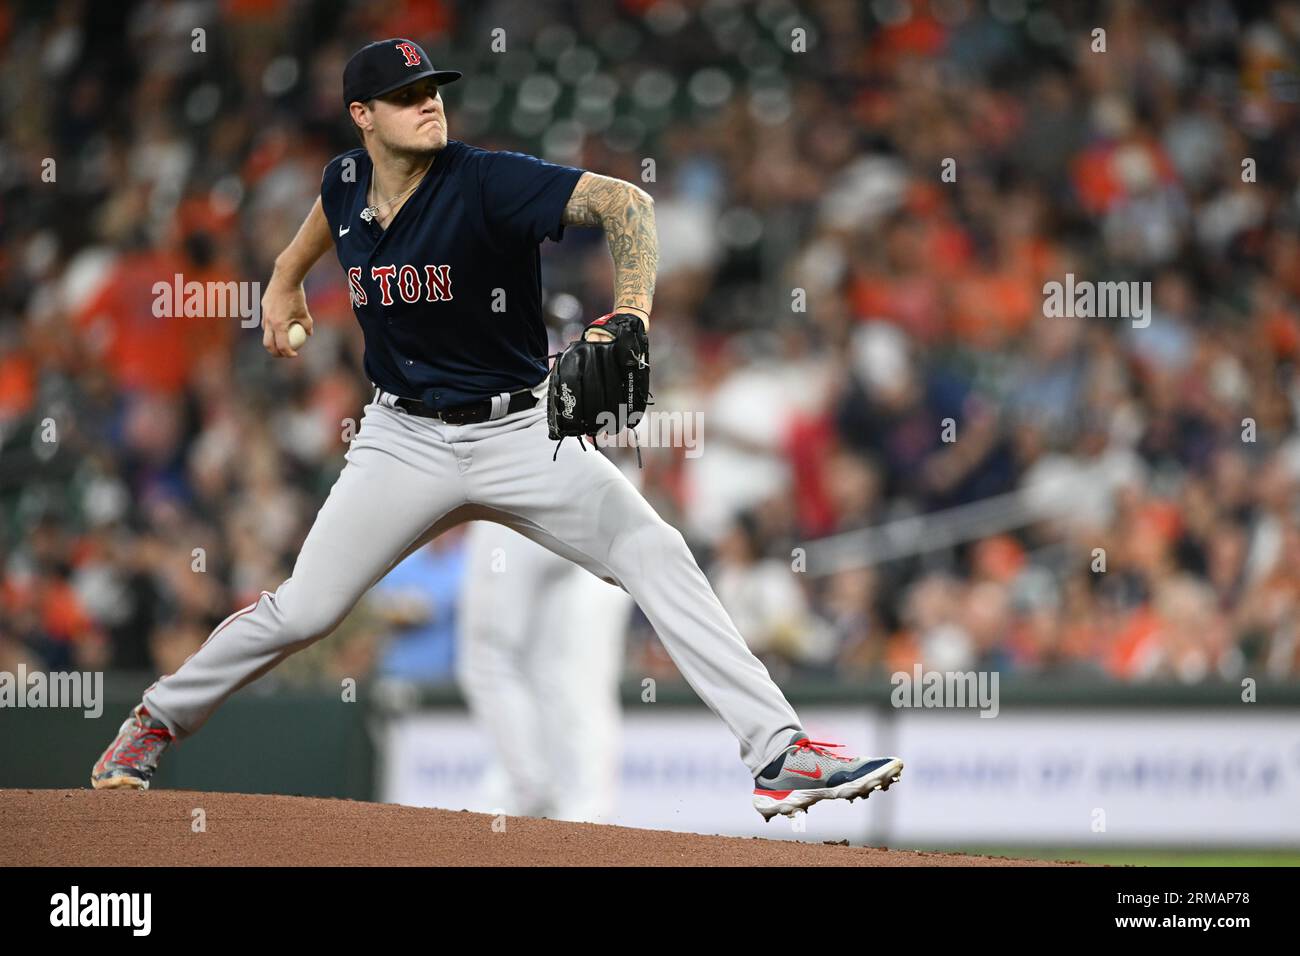 Boston Red Sox starting pitcher Tanner Houck (89) in the bottom of the first inning of the MLB game between the Boston Red Sox and the Houston Astros Stock Photo